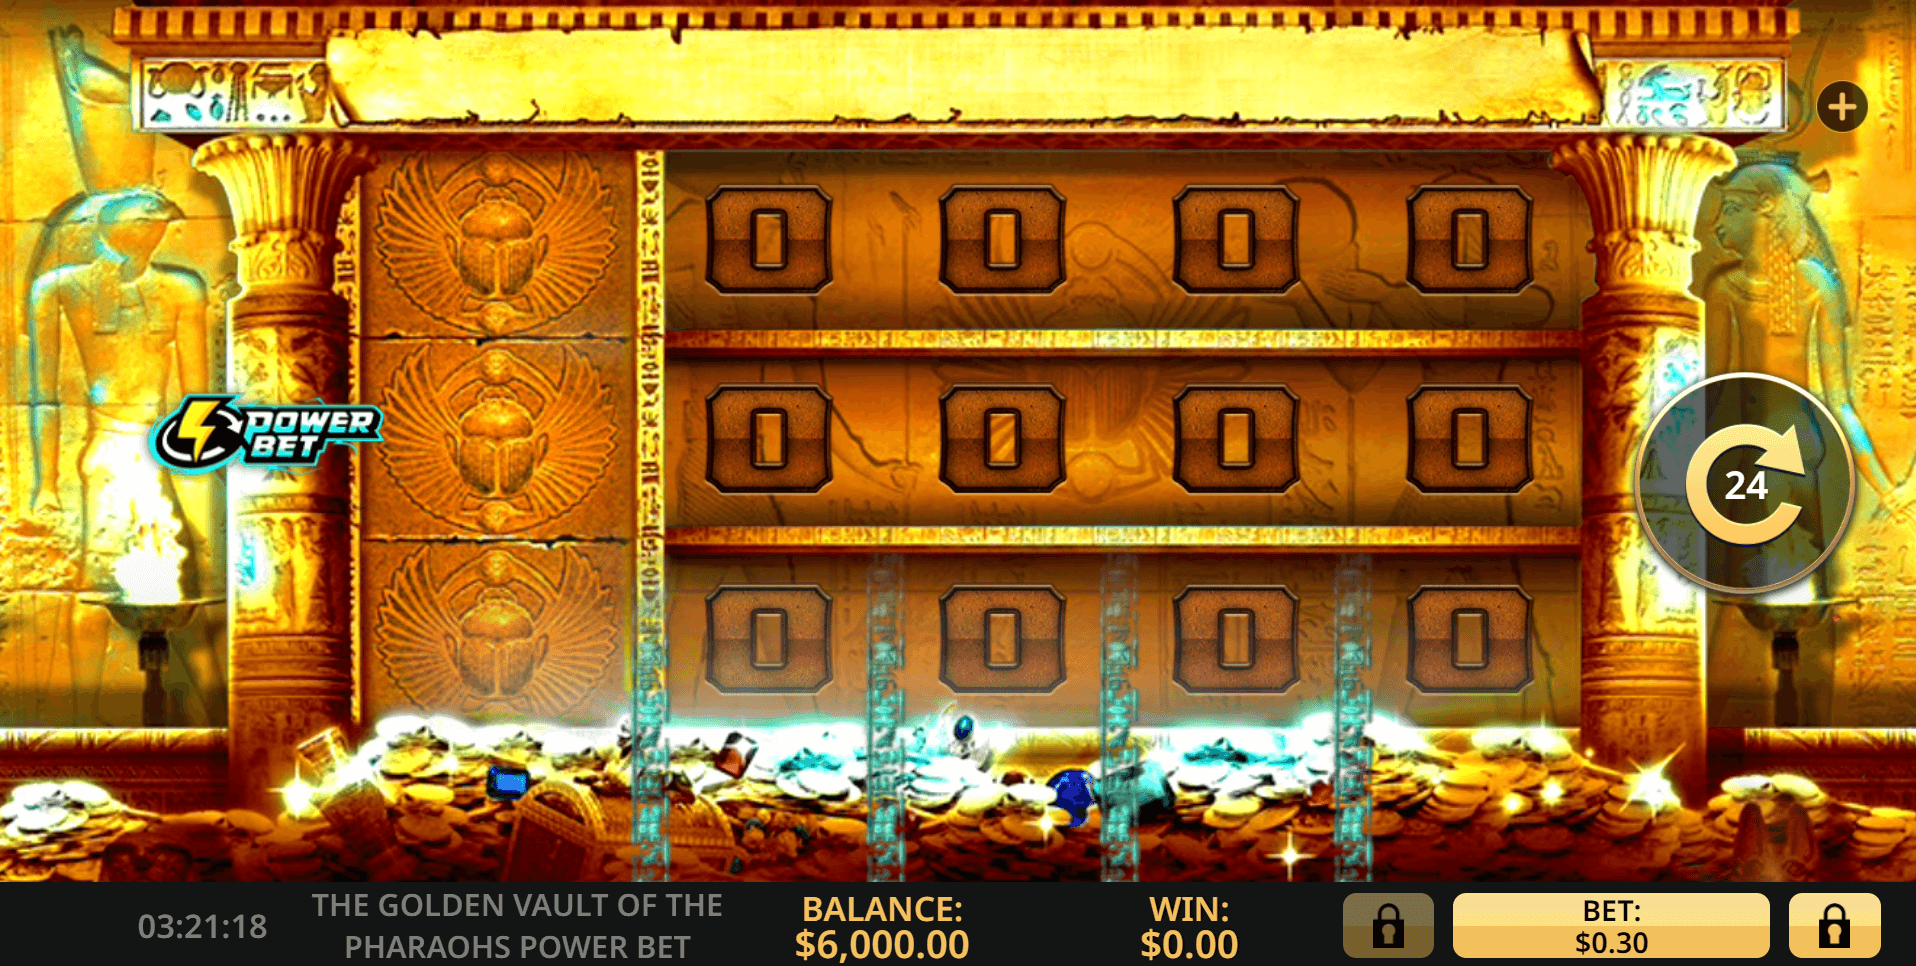 The Golden Vault Of The Pharaohs Power Bet slot play free